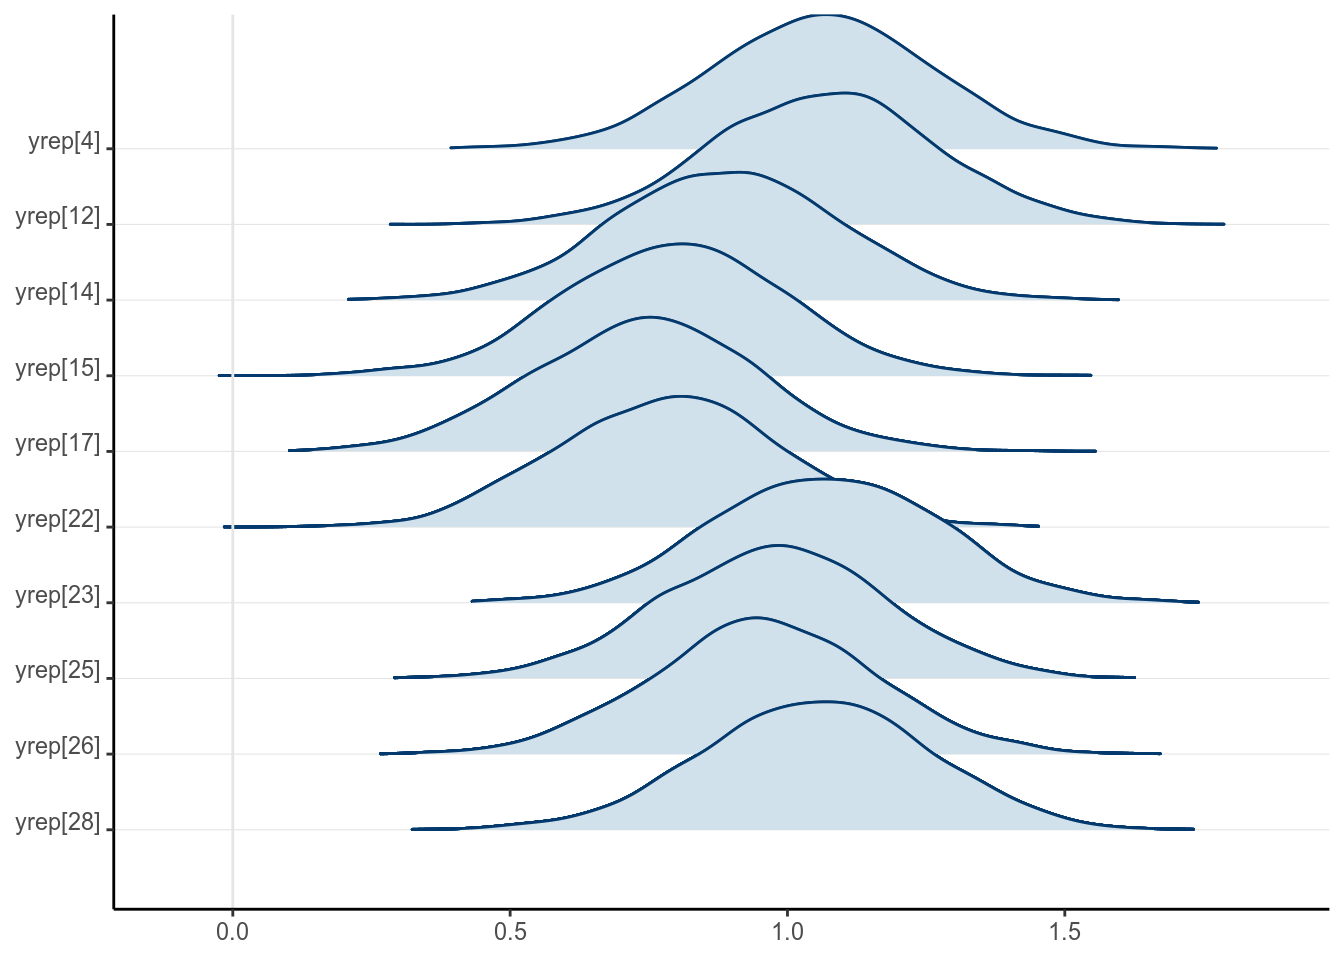 Posterior density plots of the first two missing values of \texttt{kid_score}